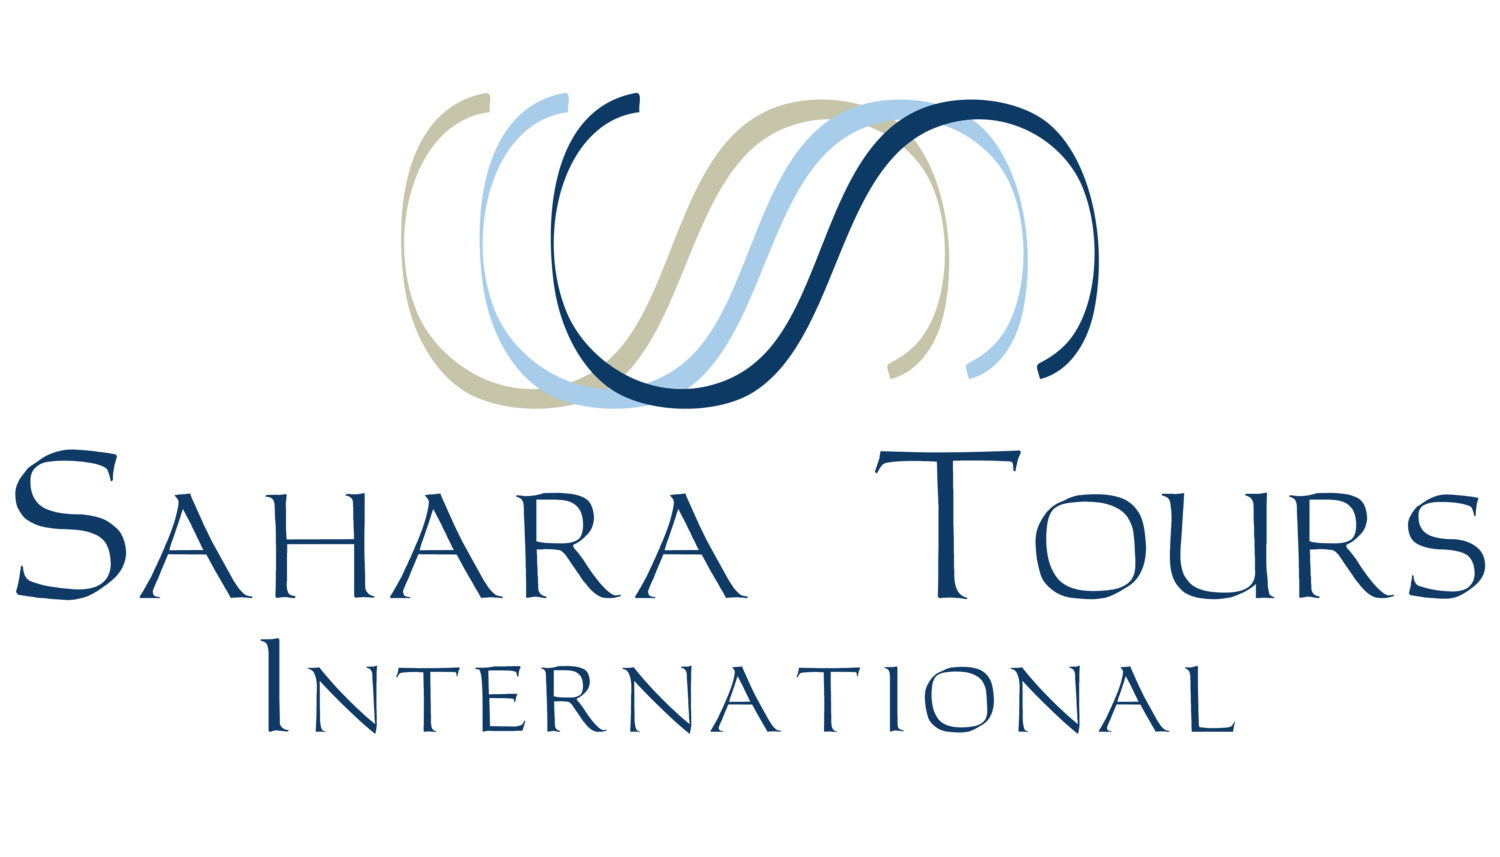 Sahara Tours International- Luxury travel agency in Morocco, Activities, Hotels, Riads, Tours, Transfers